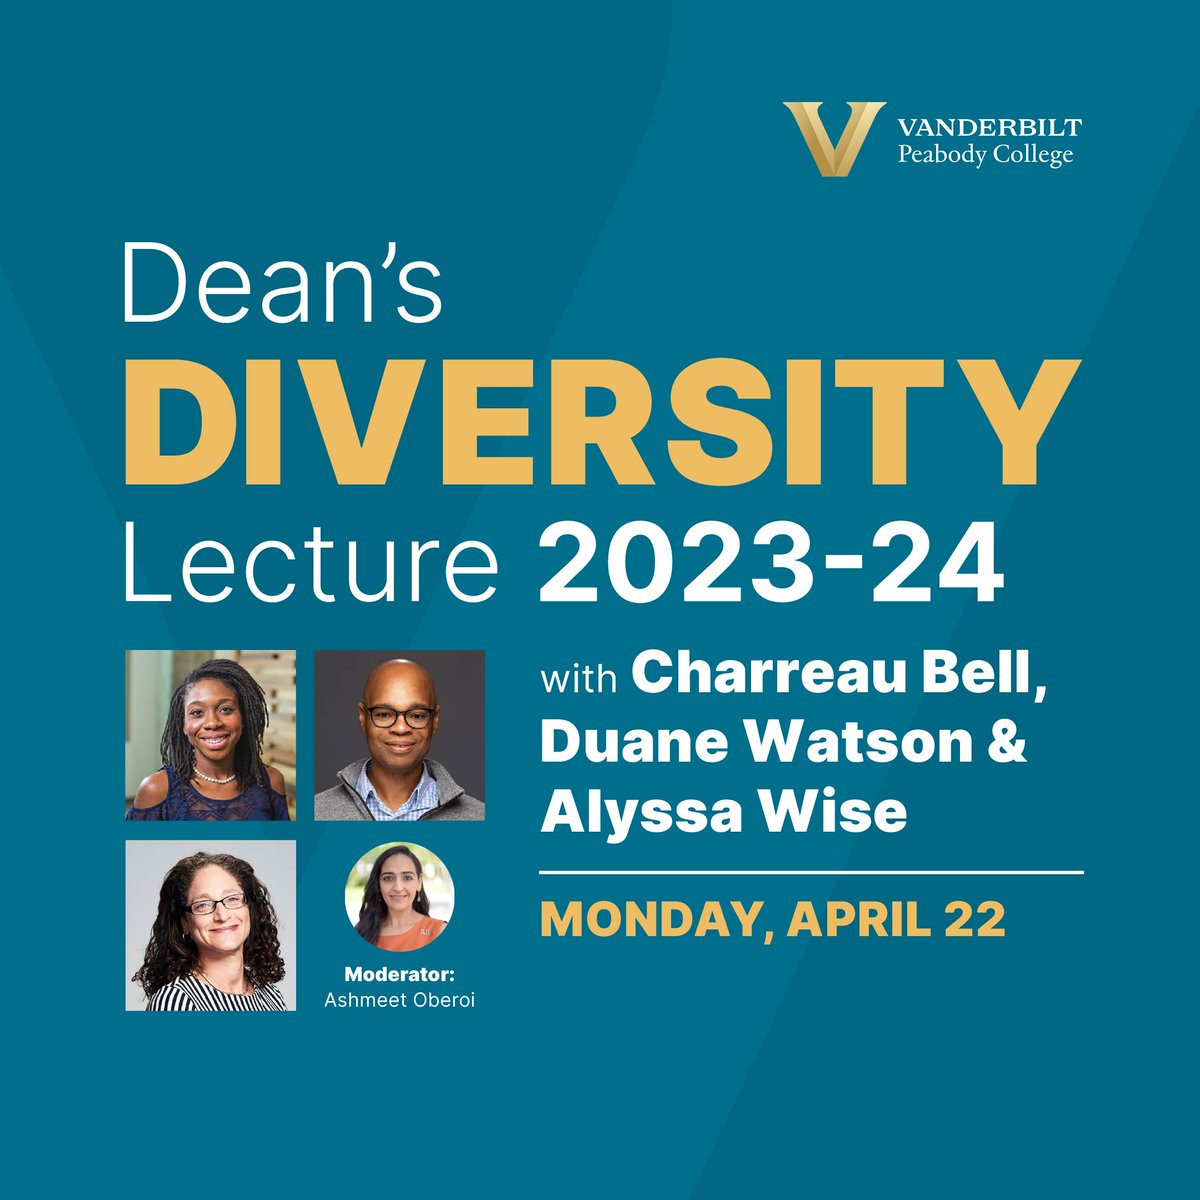 You are invited to join us this Monday for our next Dean's Diversity Lecture. This session will examine the societal, ethical, and moral questions surrounding AI's role in higher education. Register now: bit.ly/3xHpCLz